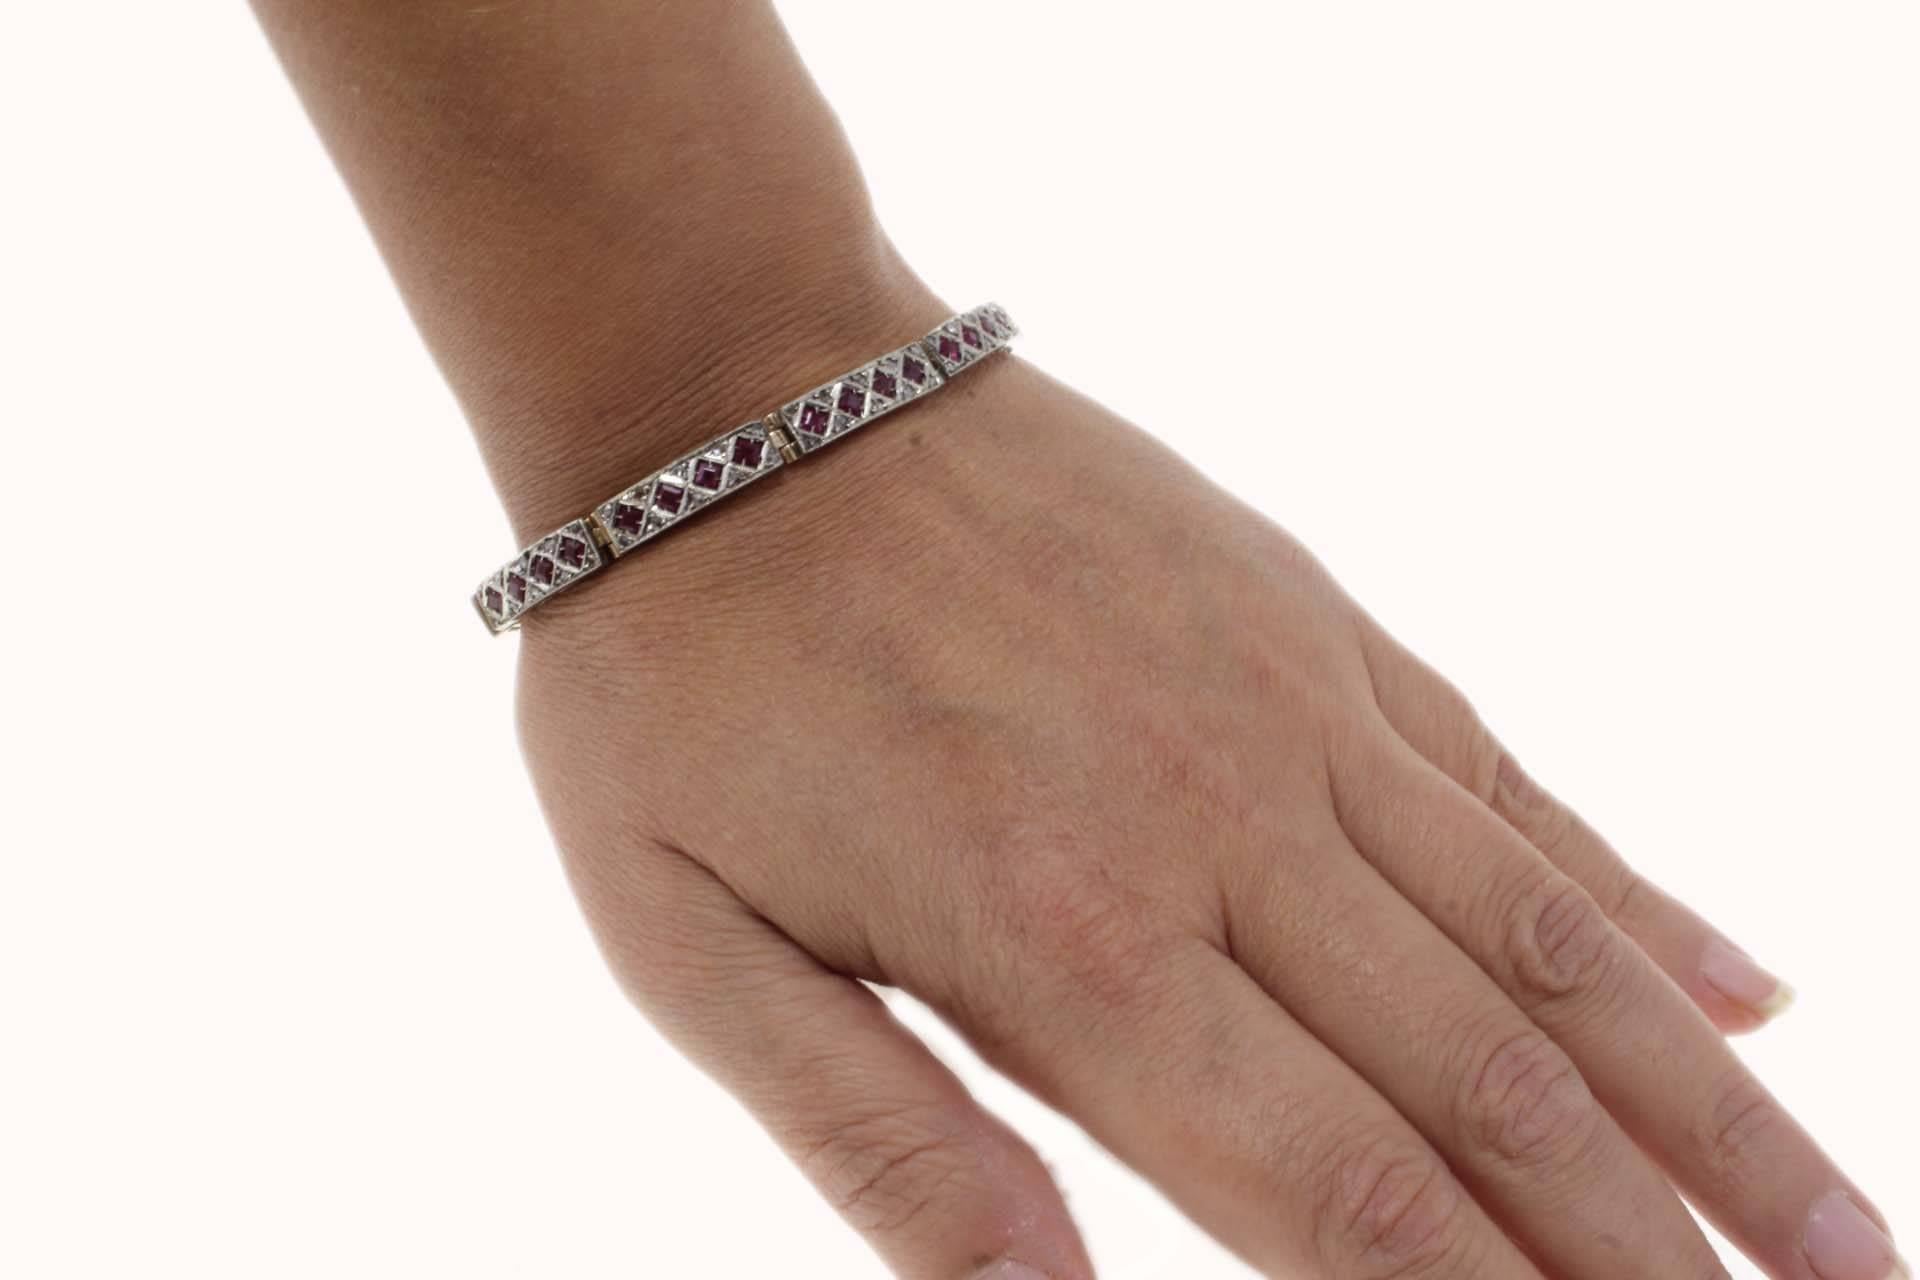  Diamonds and Rubies Rose Gold and Silver Retro Bracelet 2